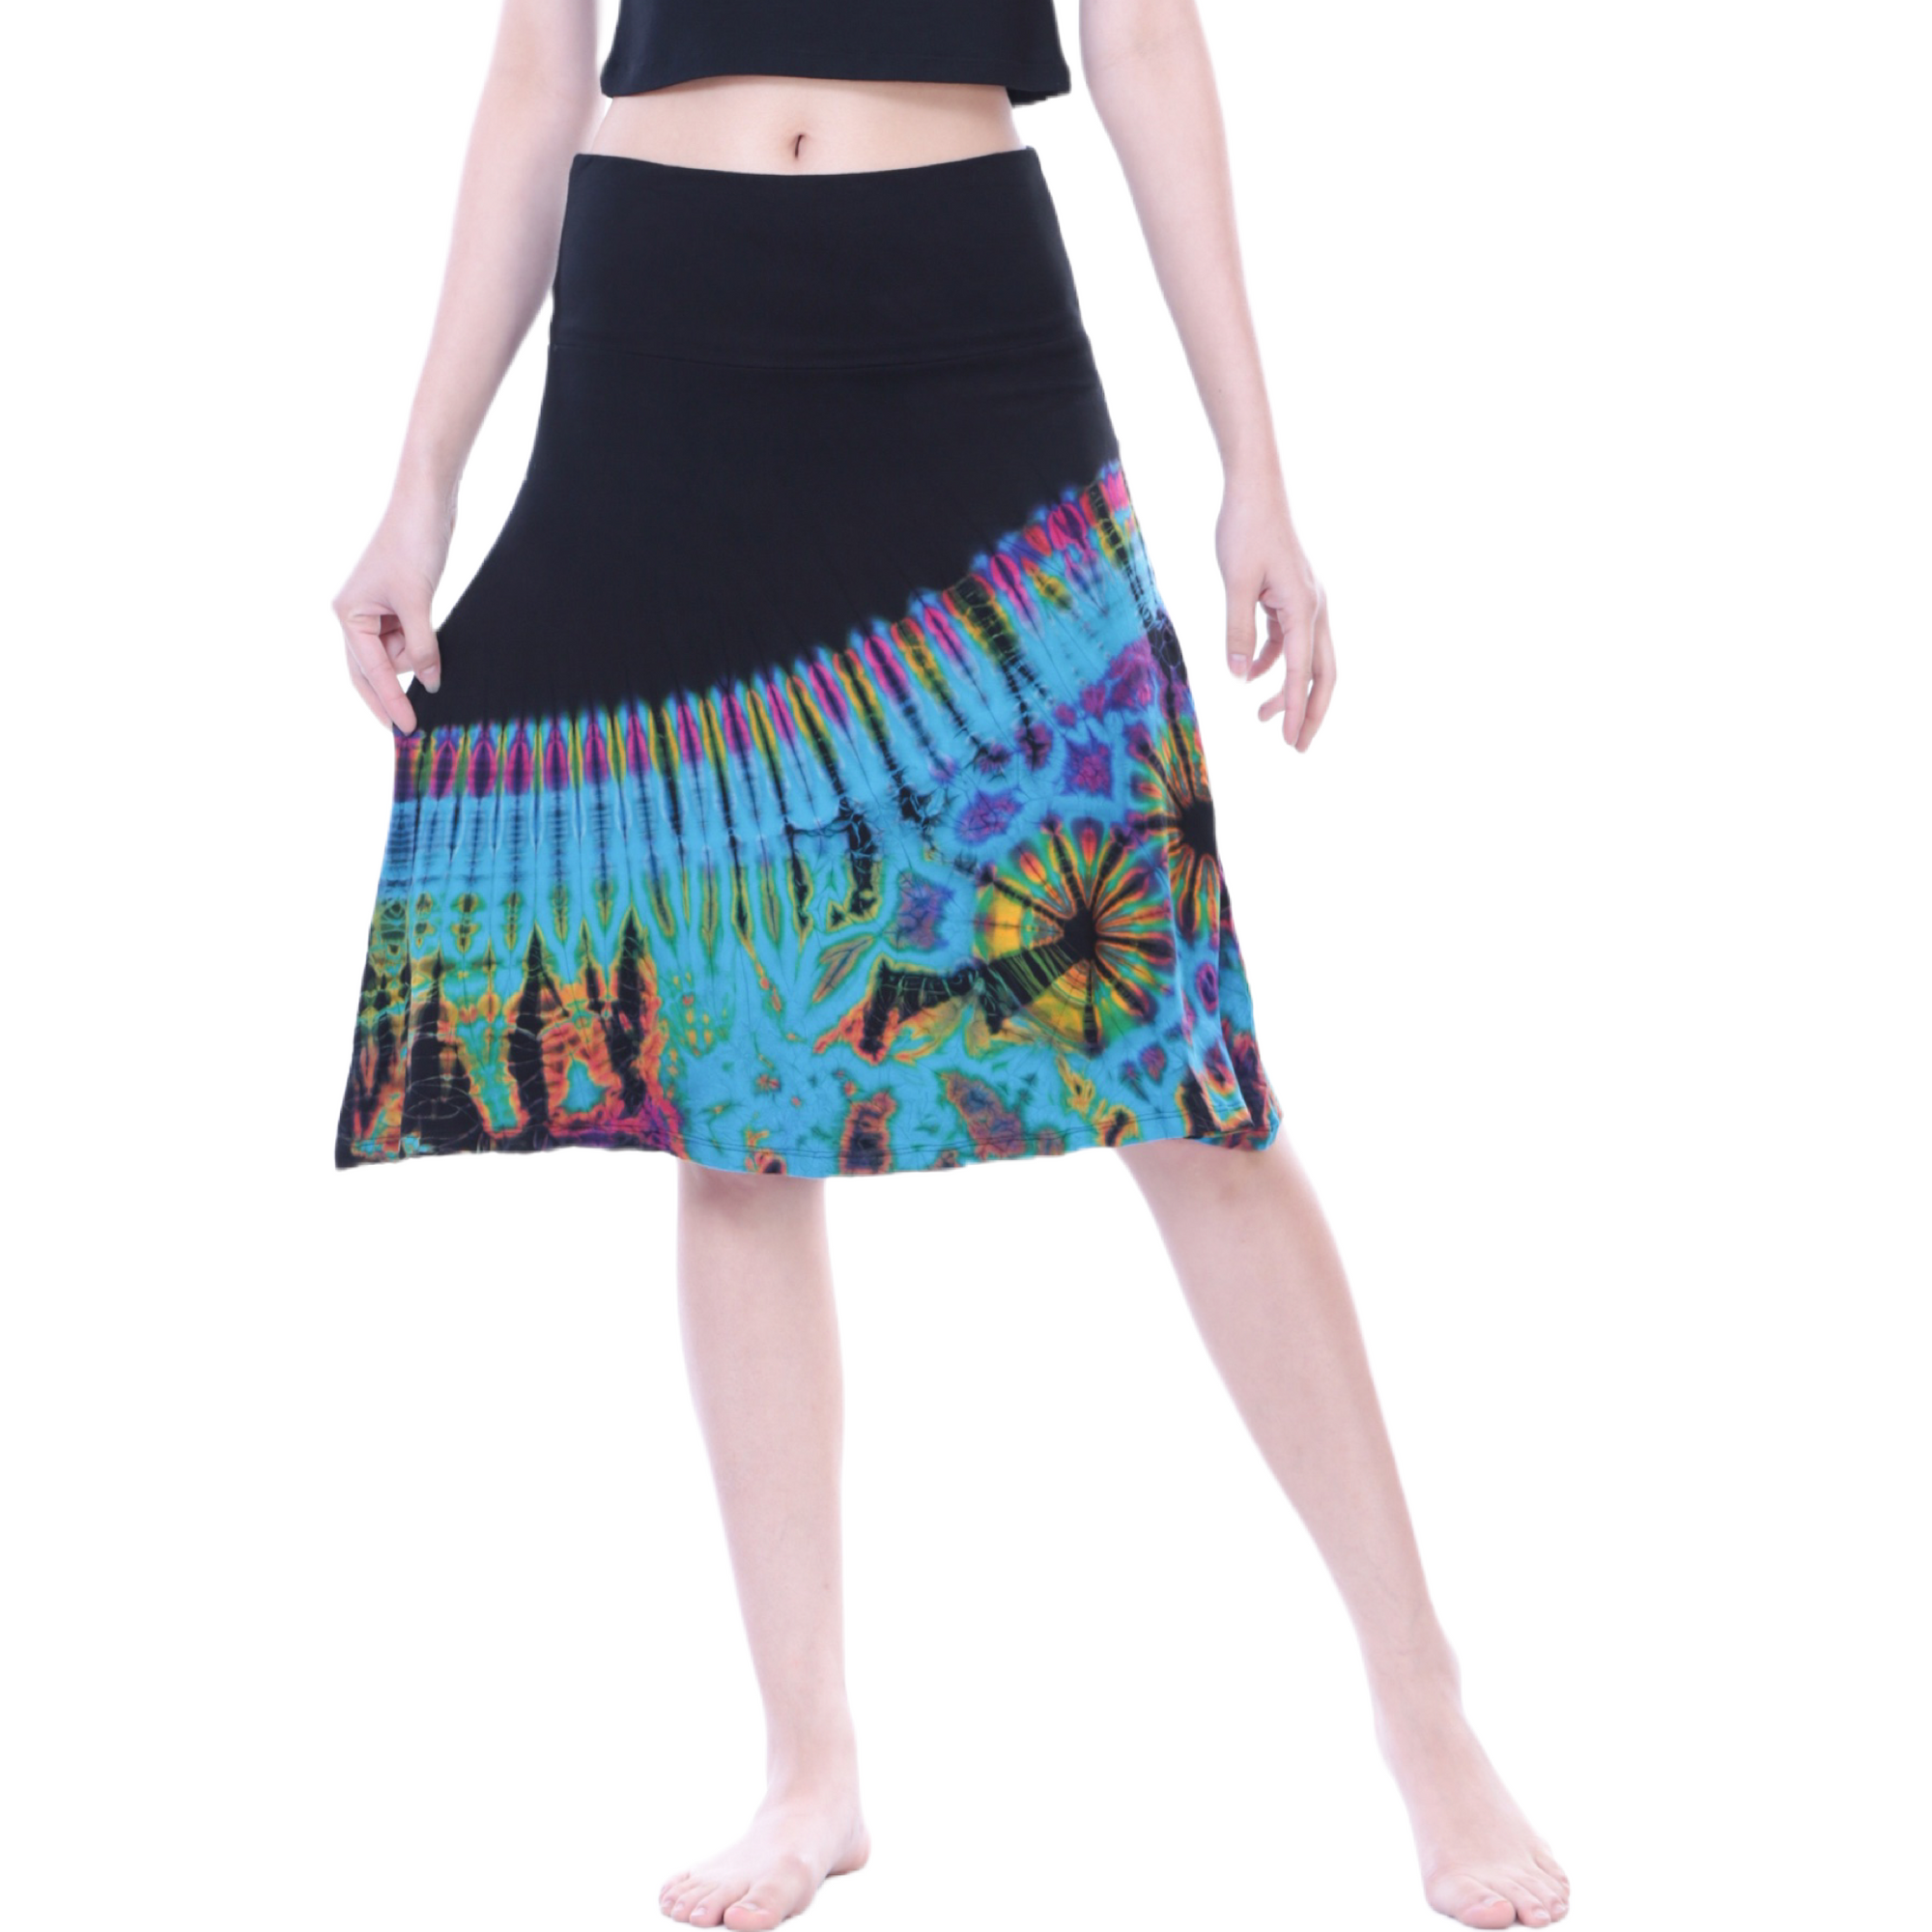 not your typical pencil skirt | handmade, fairtrade knee length skirt by malisun | best price for fair trade clothing gbp